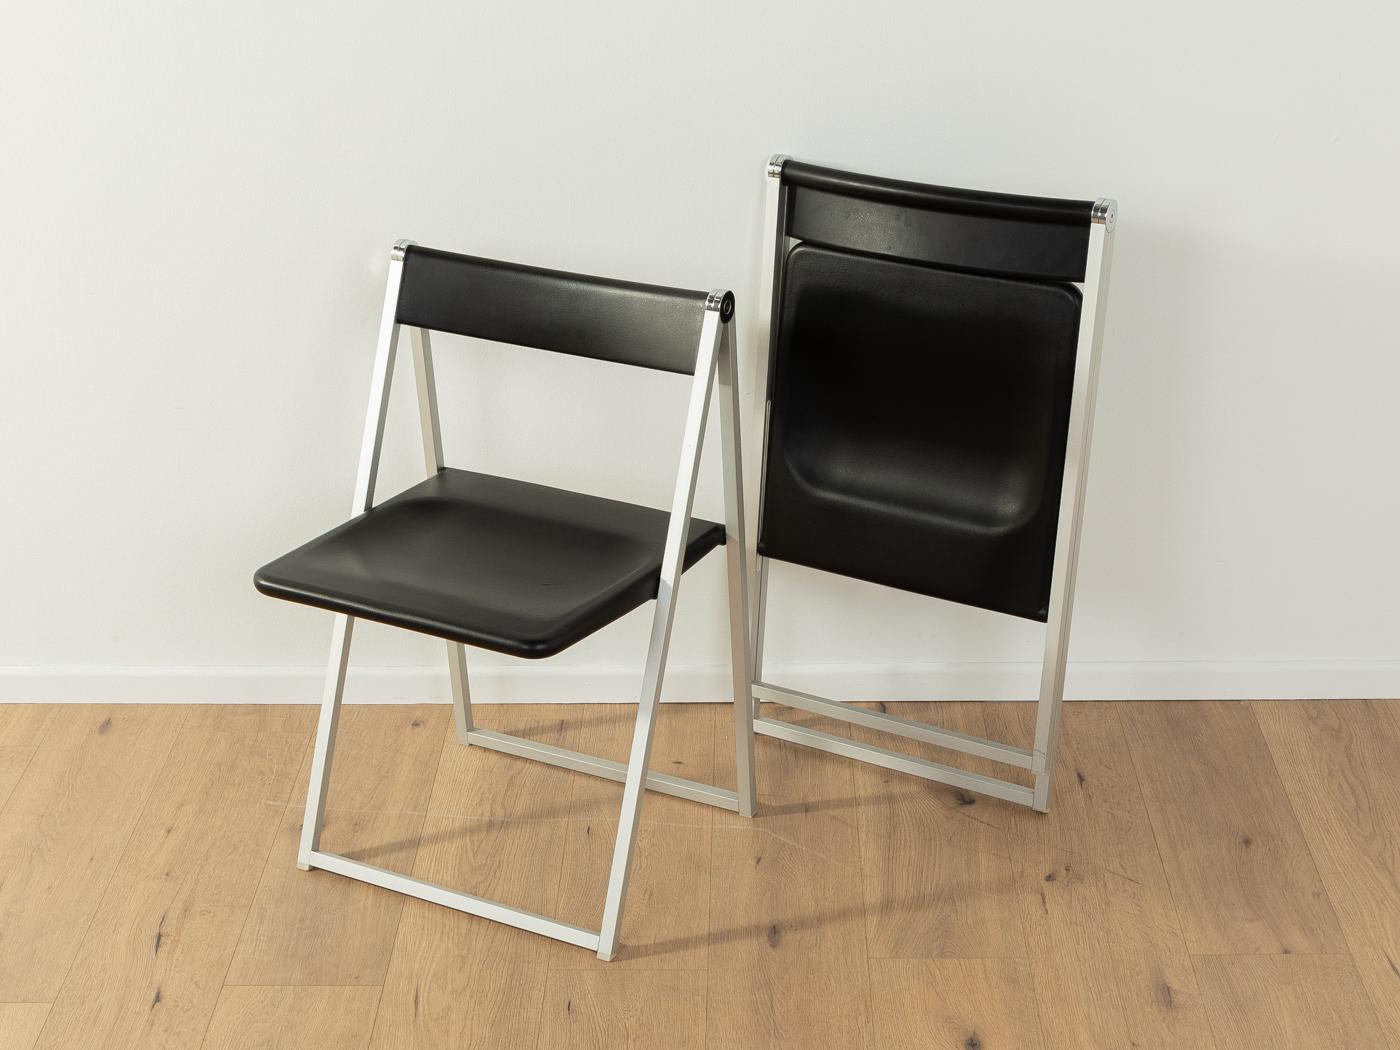 Timeless folding chairs by Swiss designer duo team form ag (Franz Hero & Karl Odermatt) for interlübke from the 1970s. High-quality stainless steel frame with backrest and seat made of plastic in black. The offer includes 2 chairs.

Quality